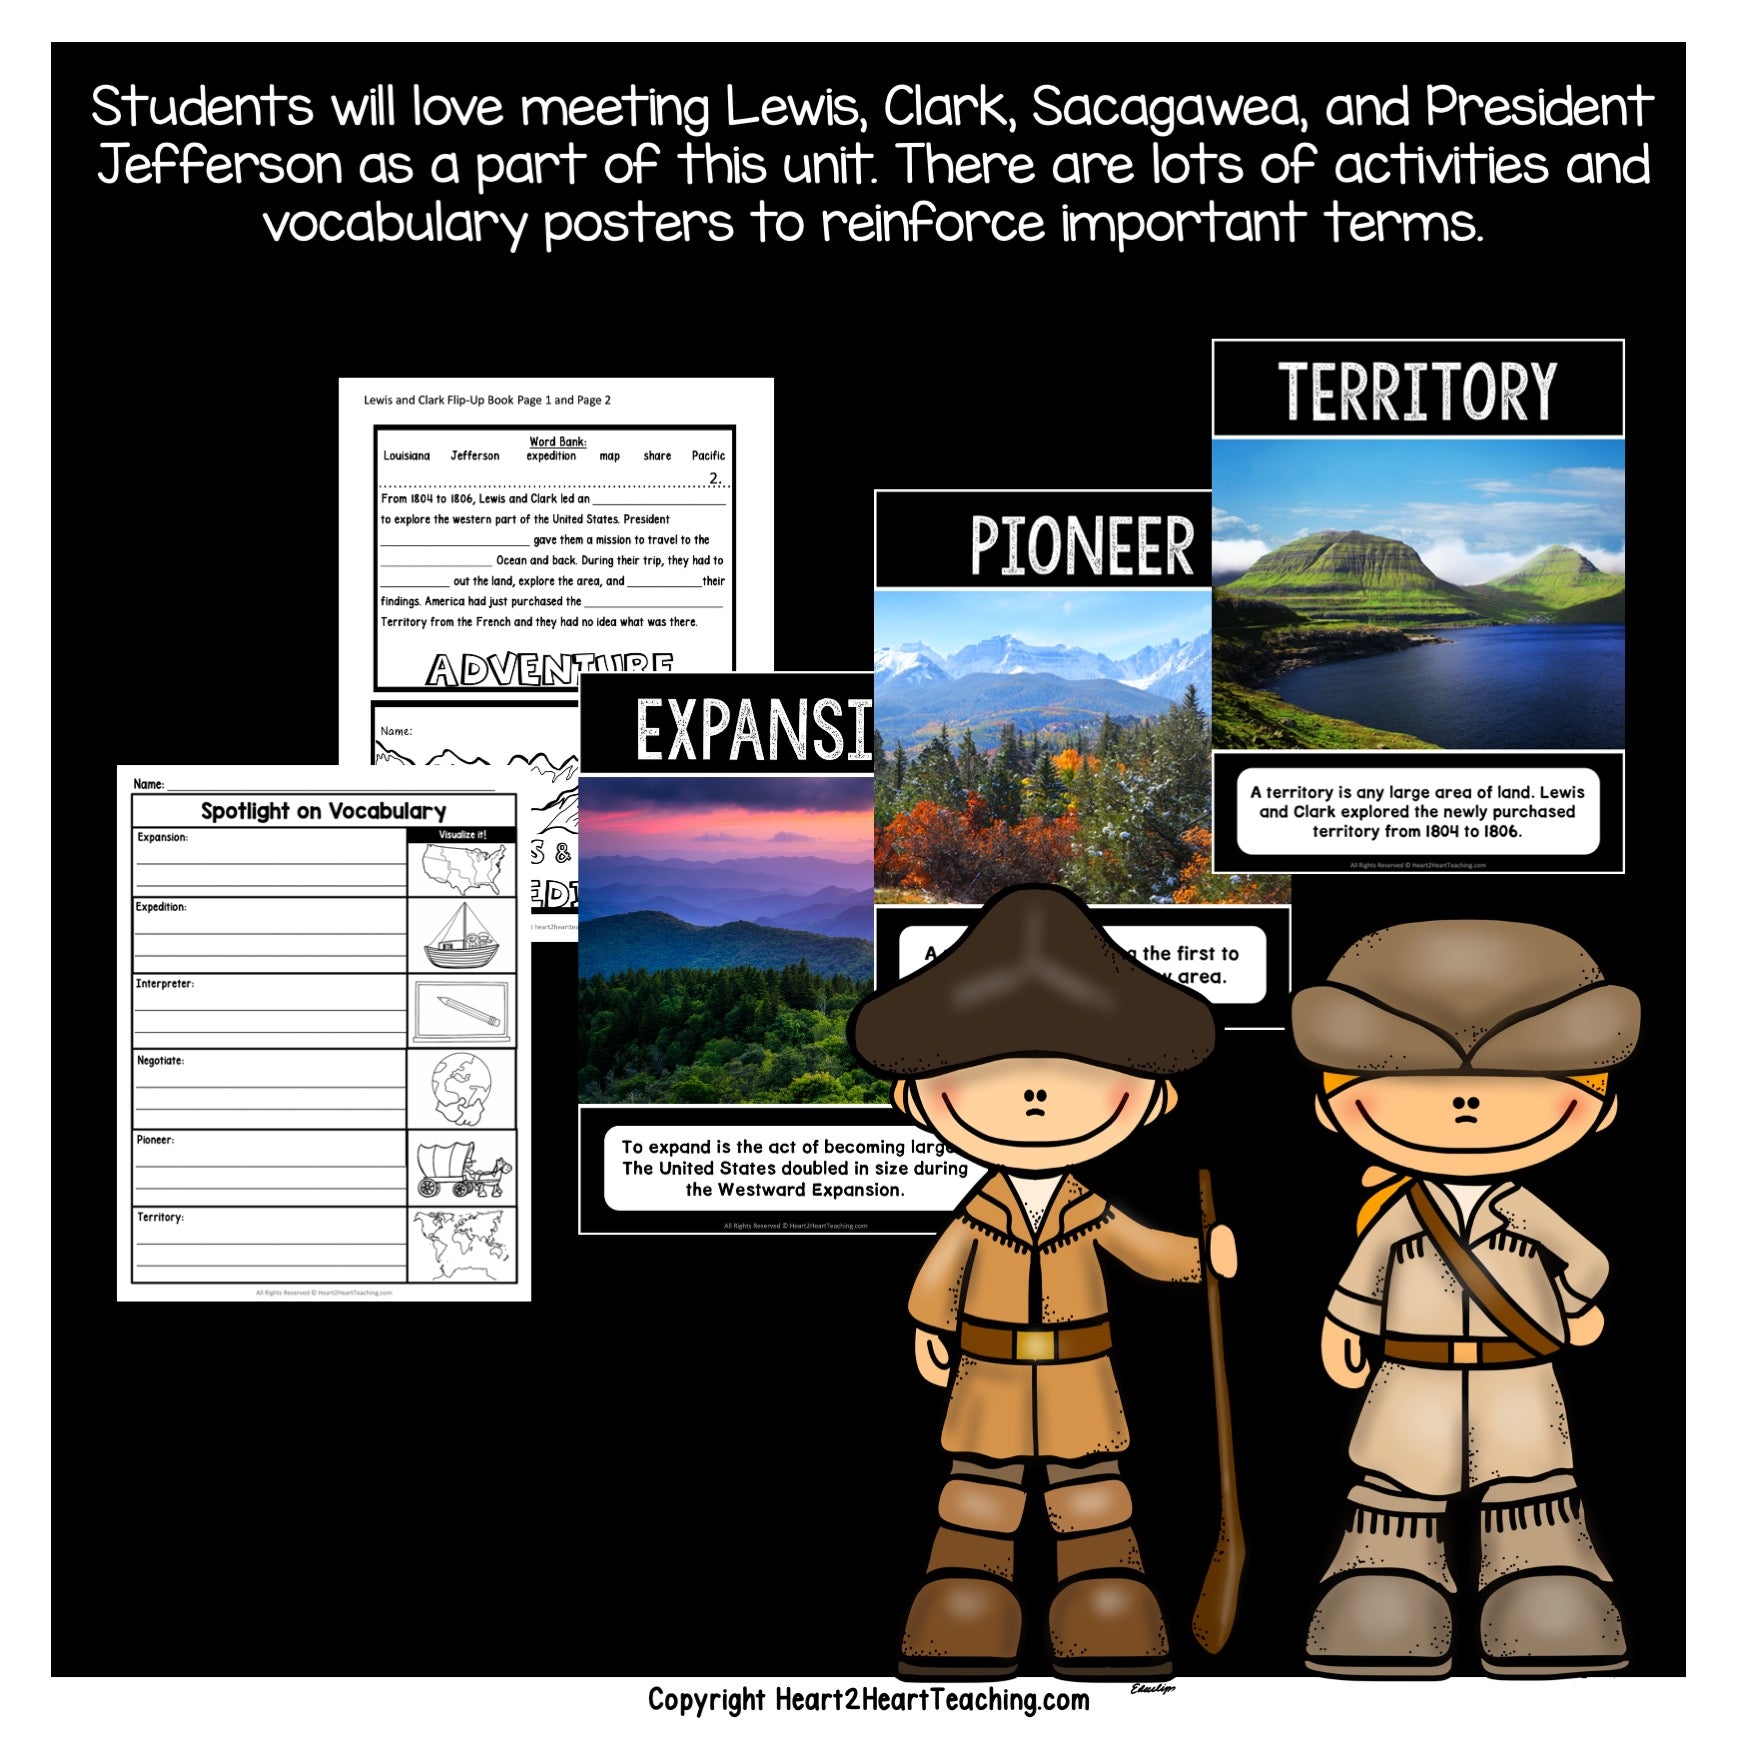 Westward expansion lets learn about the lewis and clark expedition â heart heart teaching